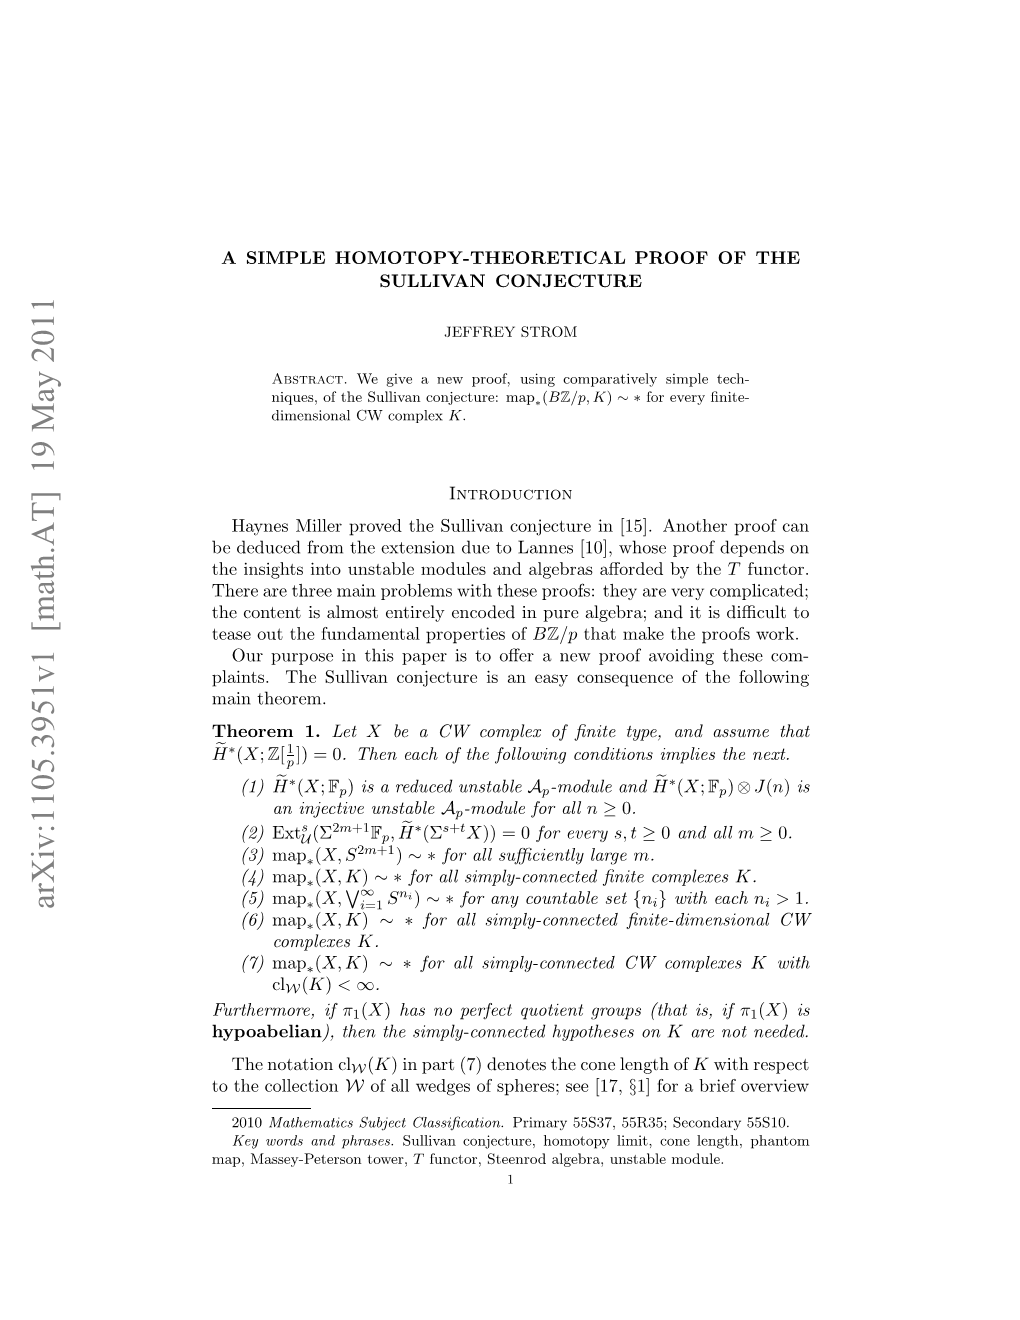 A Simple Homotopy-Theoretical Proof of the Sullivan Conjecture 3